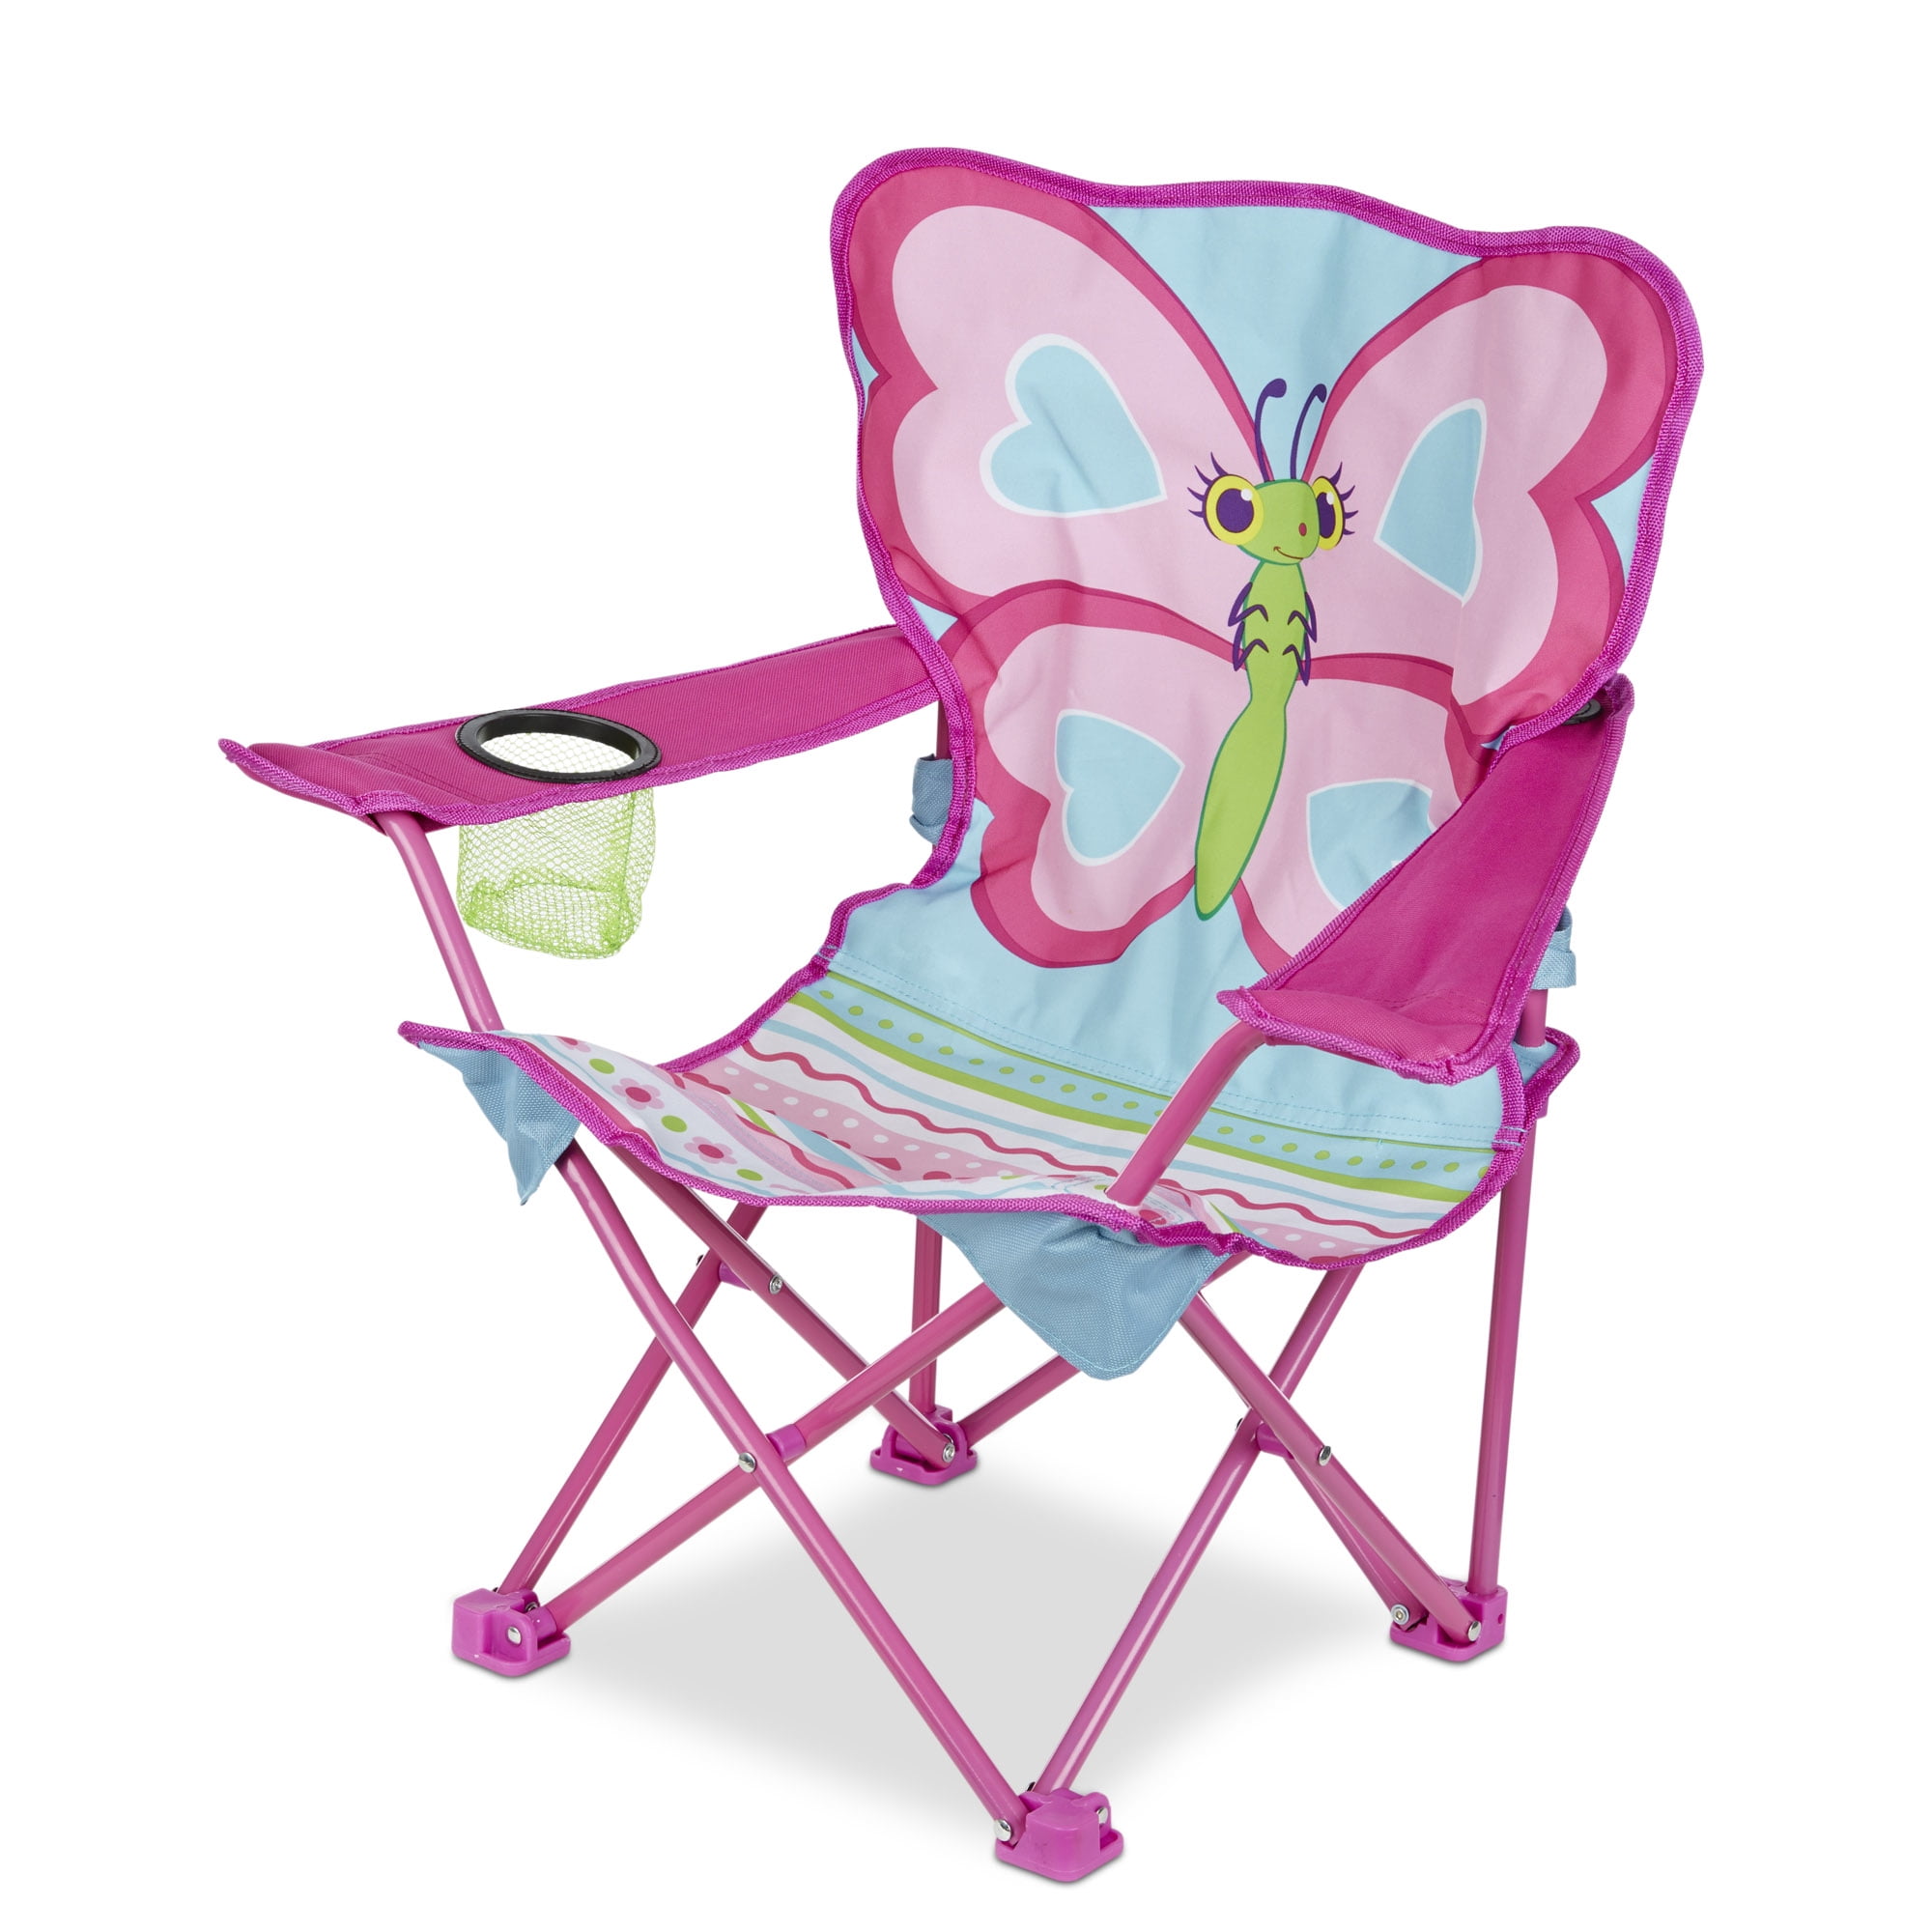 Melissa & Doug Sunny Patch Happy Giddy Outdoor Folding Lawn and Camping Chair 